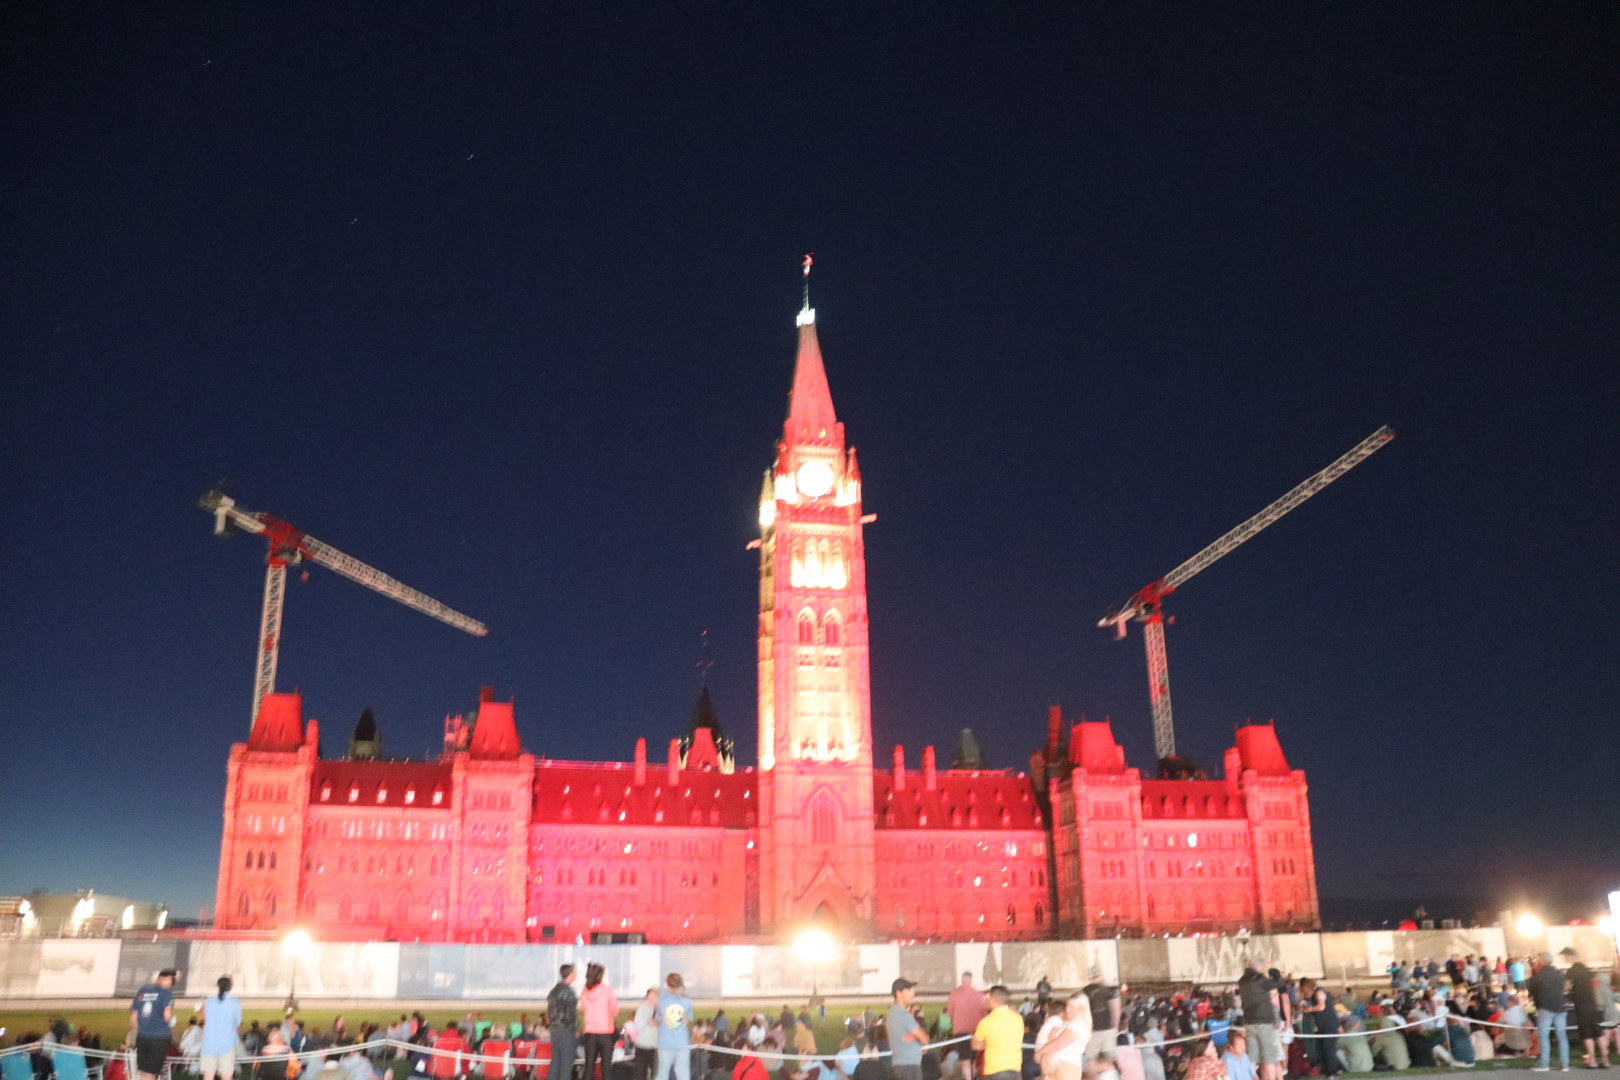 The show highlighting Canadian history is displayed on the walls of Parliament in downtown Ottawa.